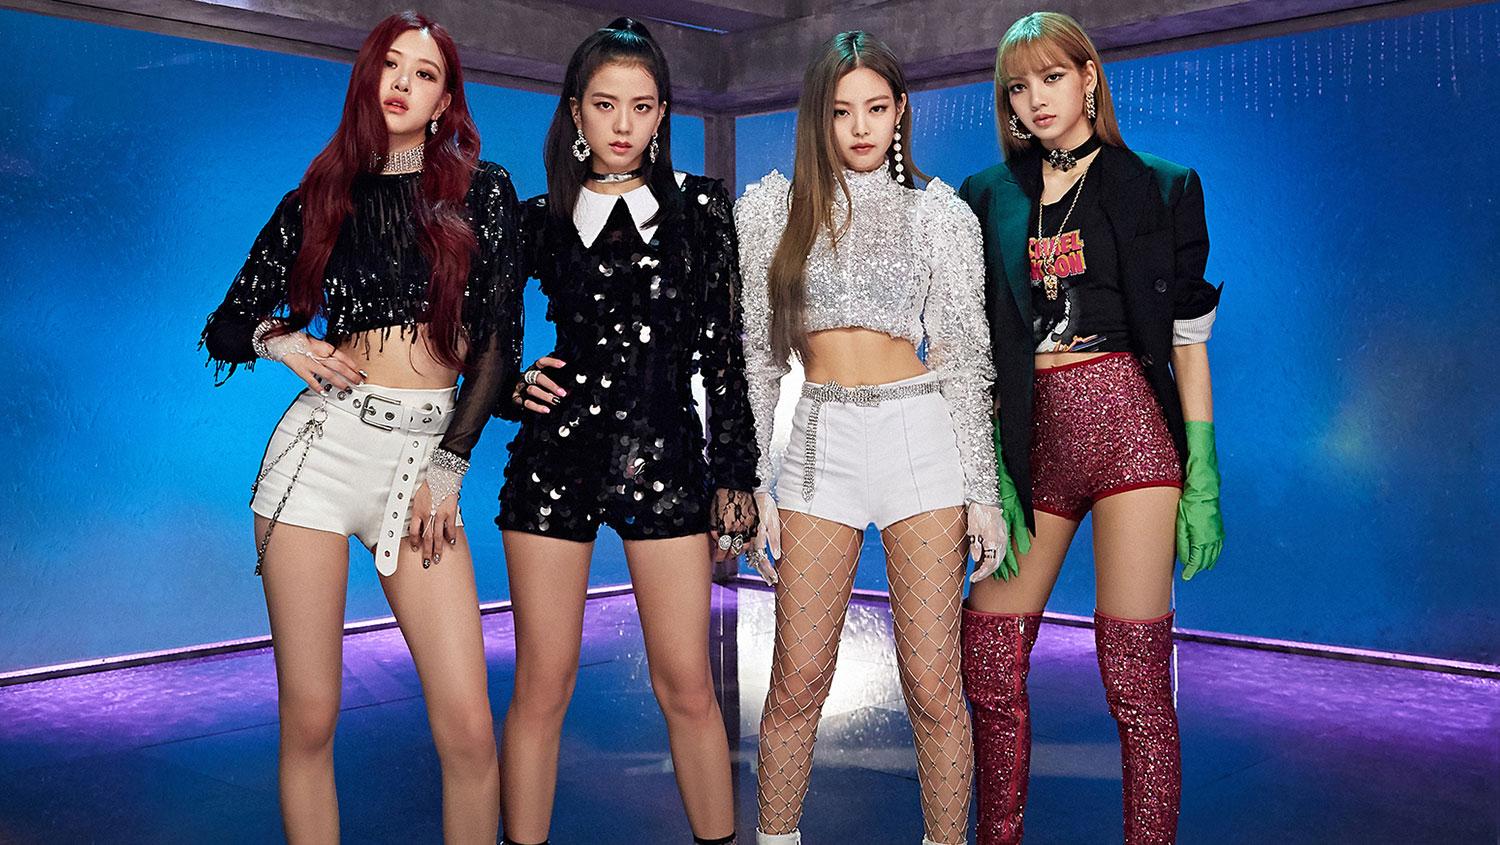 BLACKPINK Announce World Tour With Dates To Be Determined